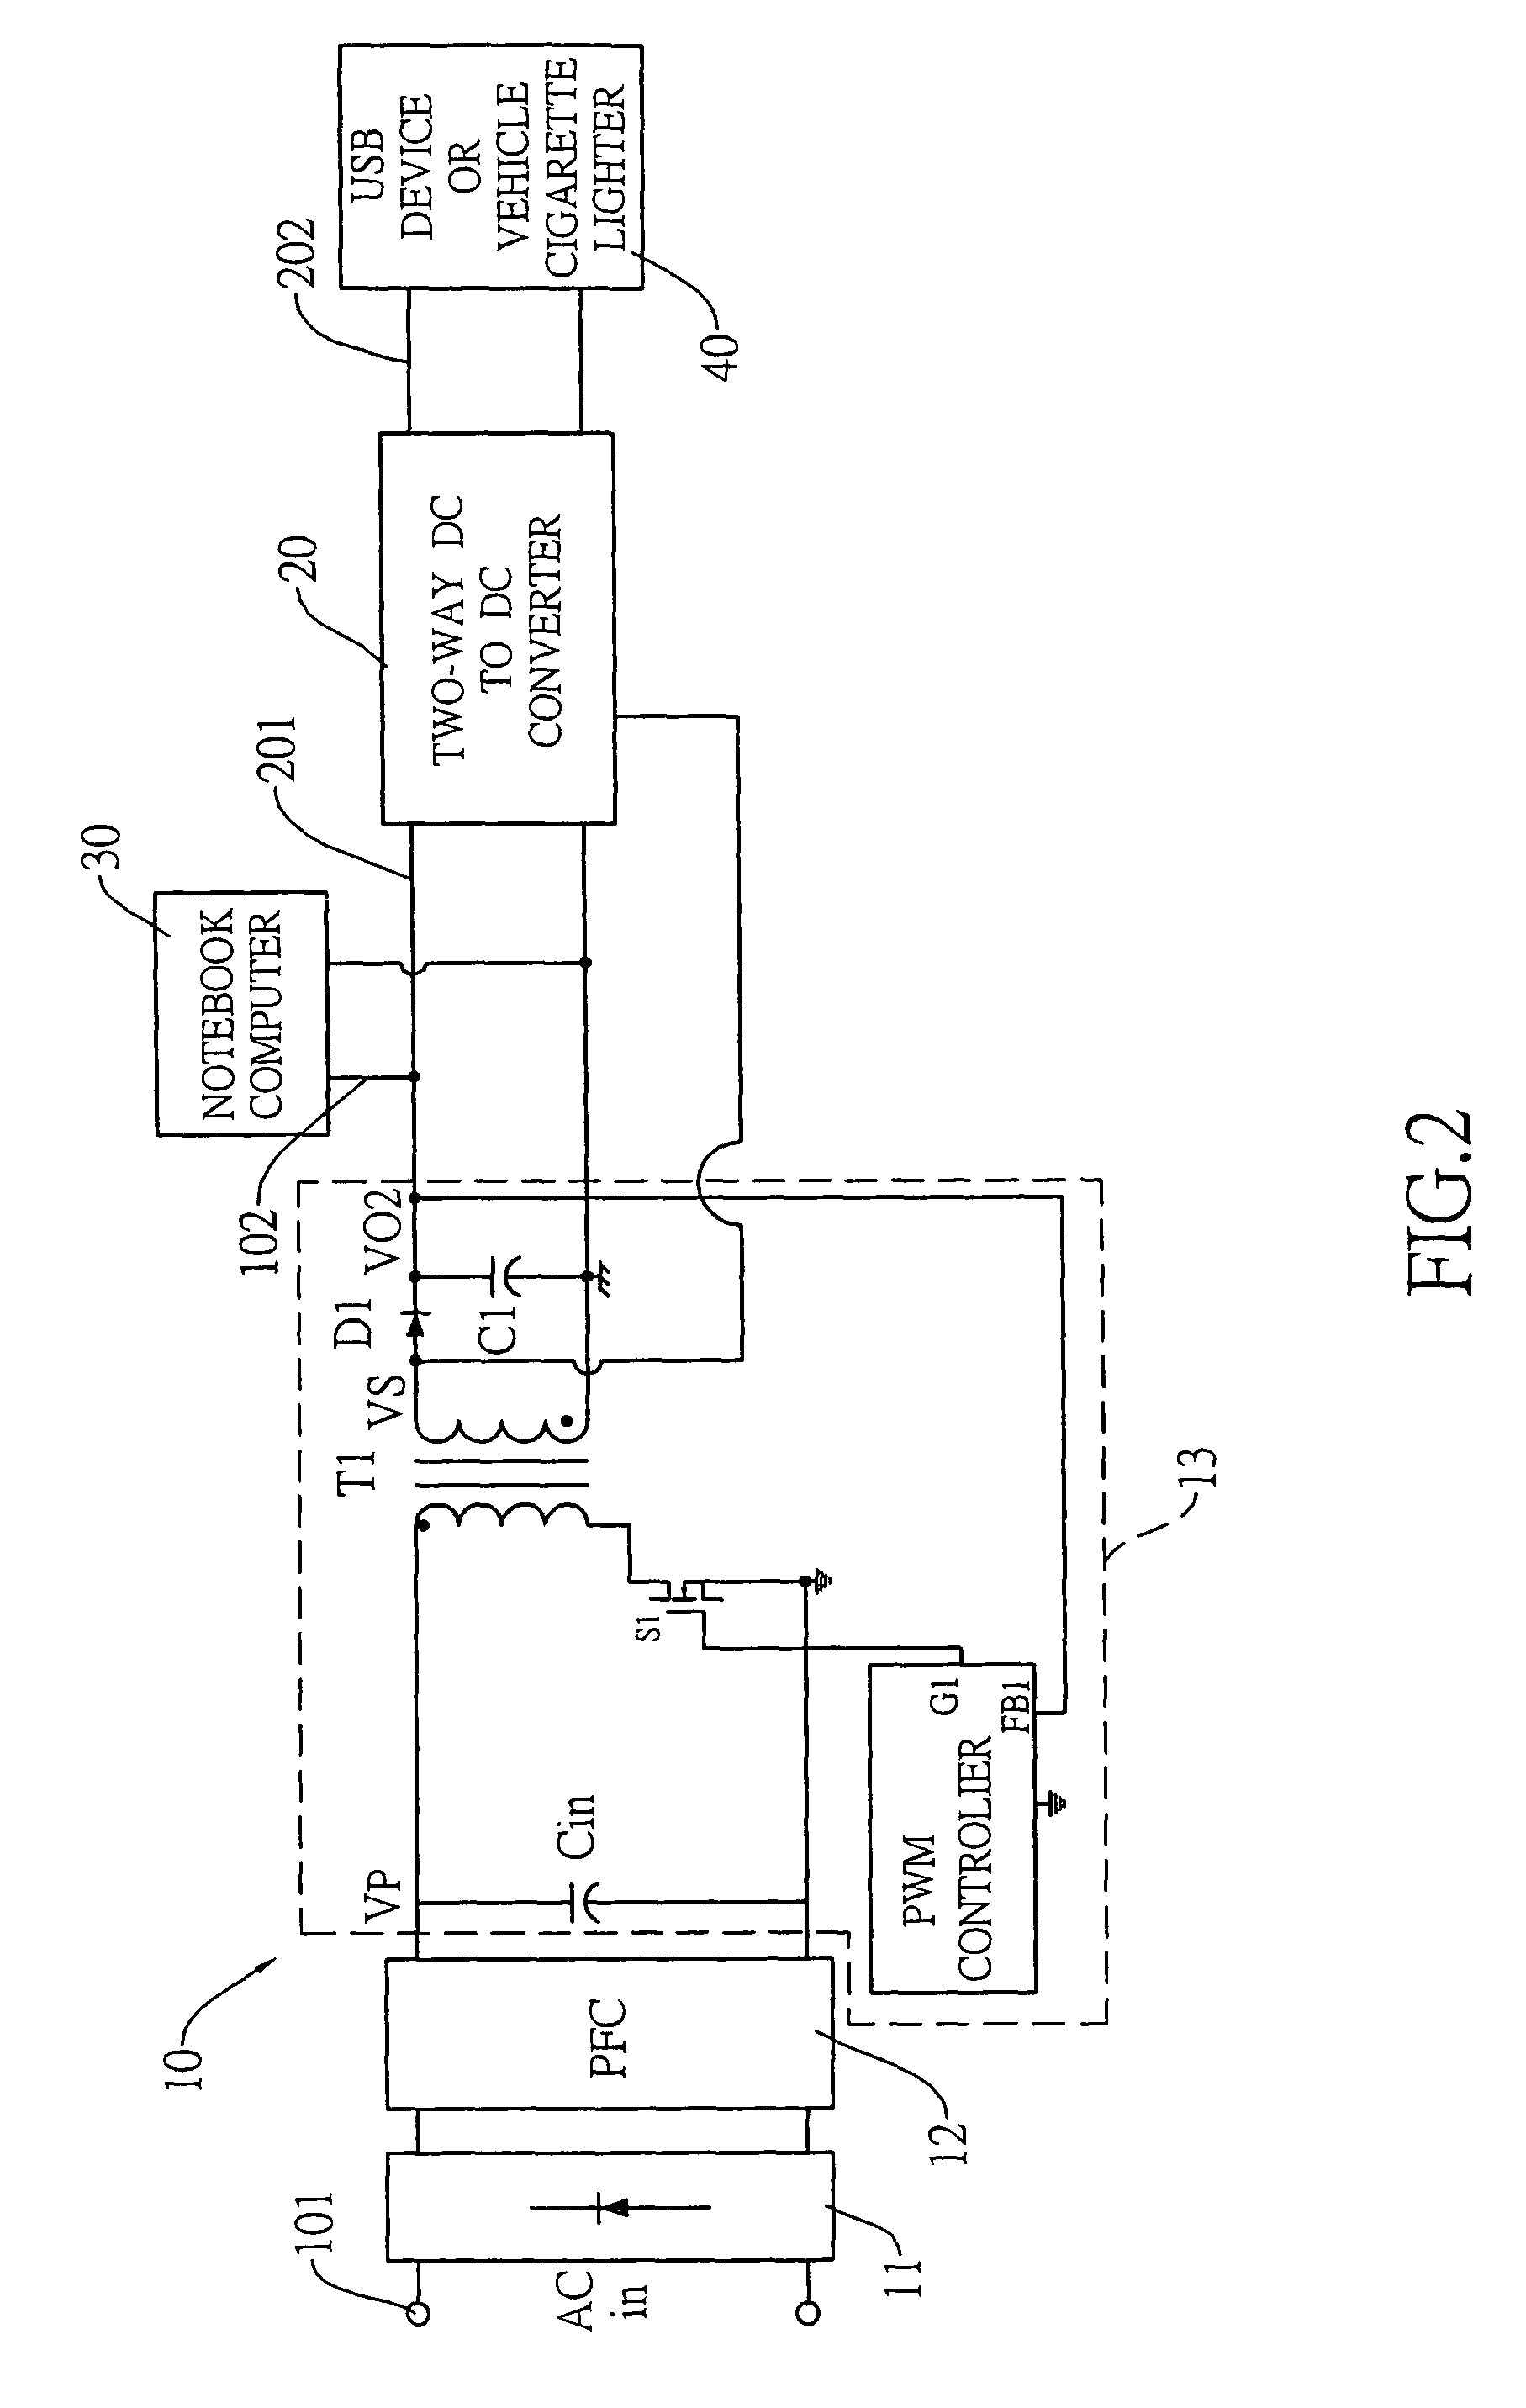 Power supply having a two-way DC to DC converter